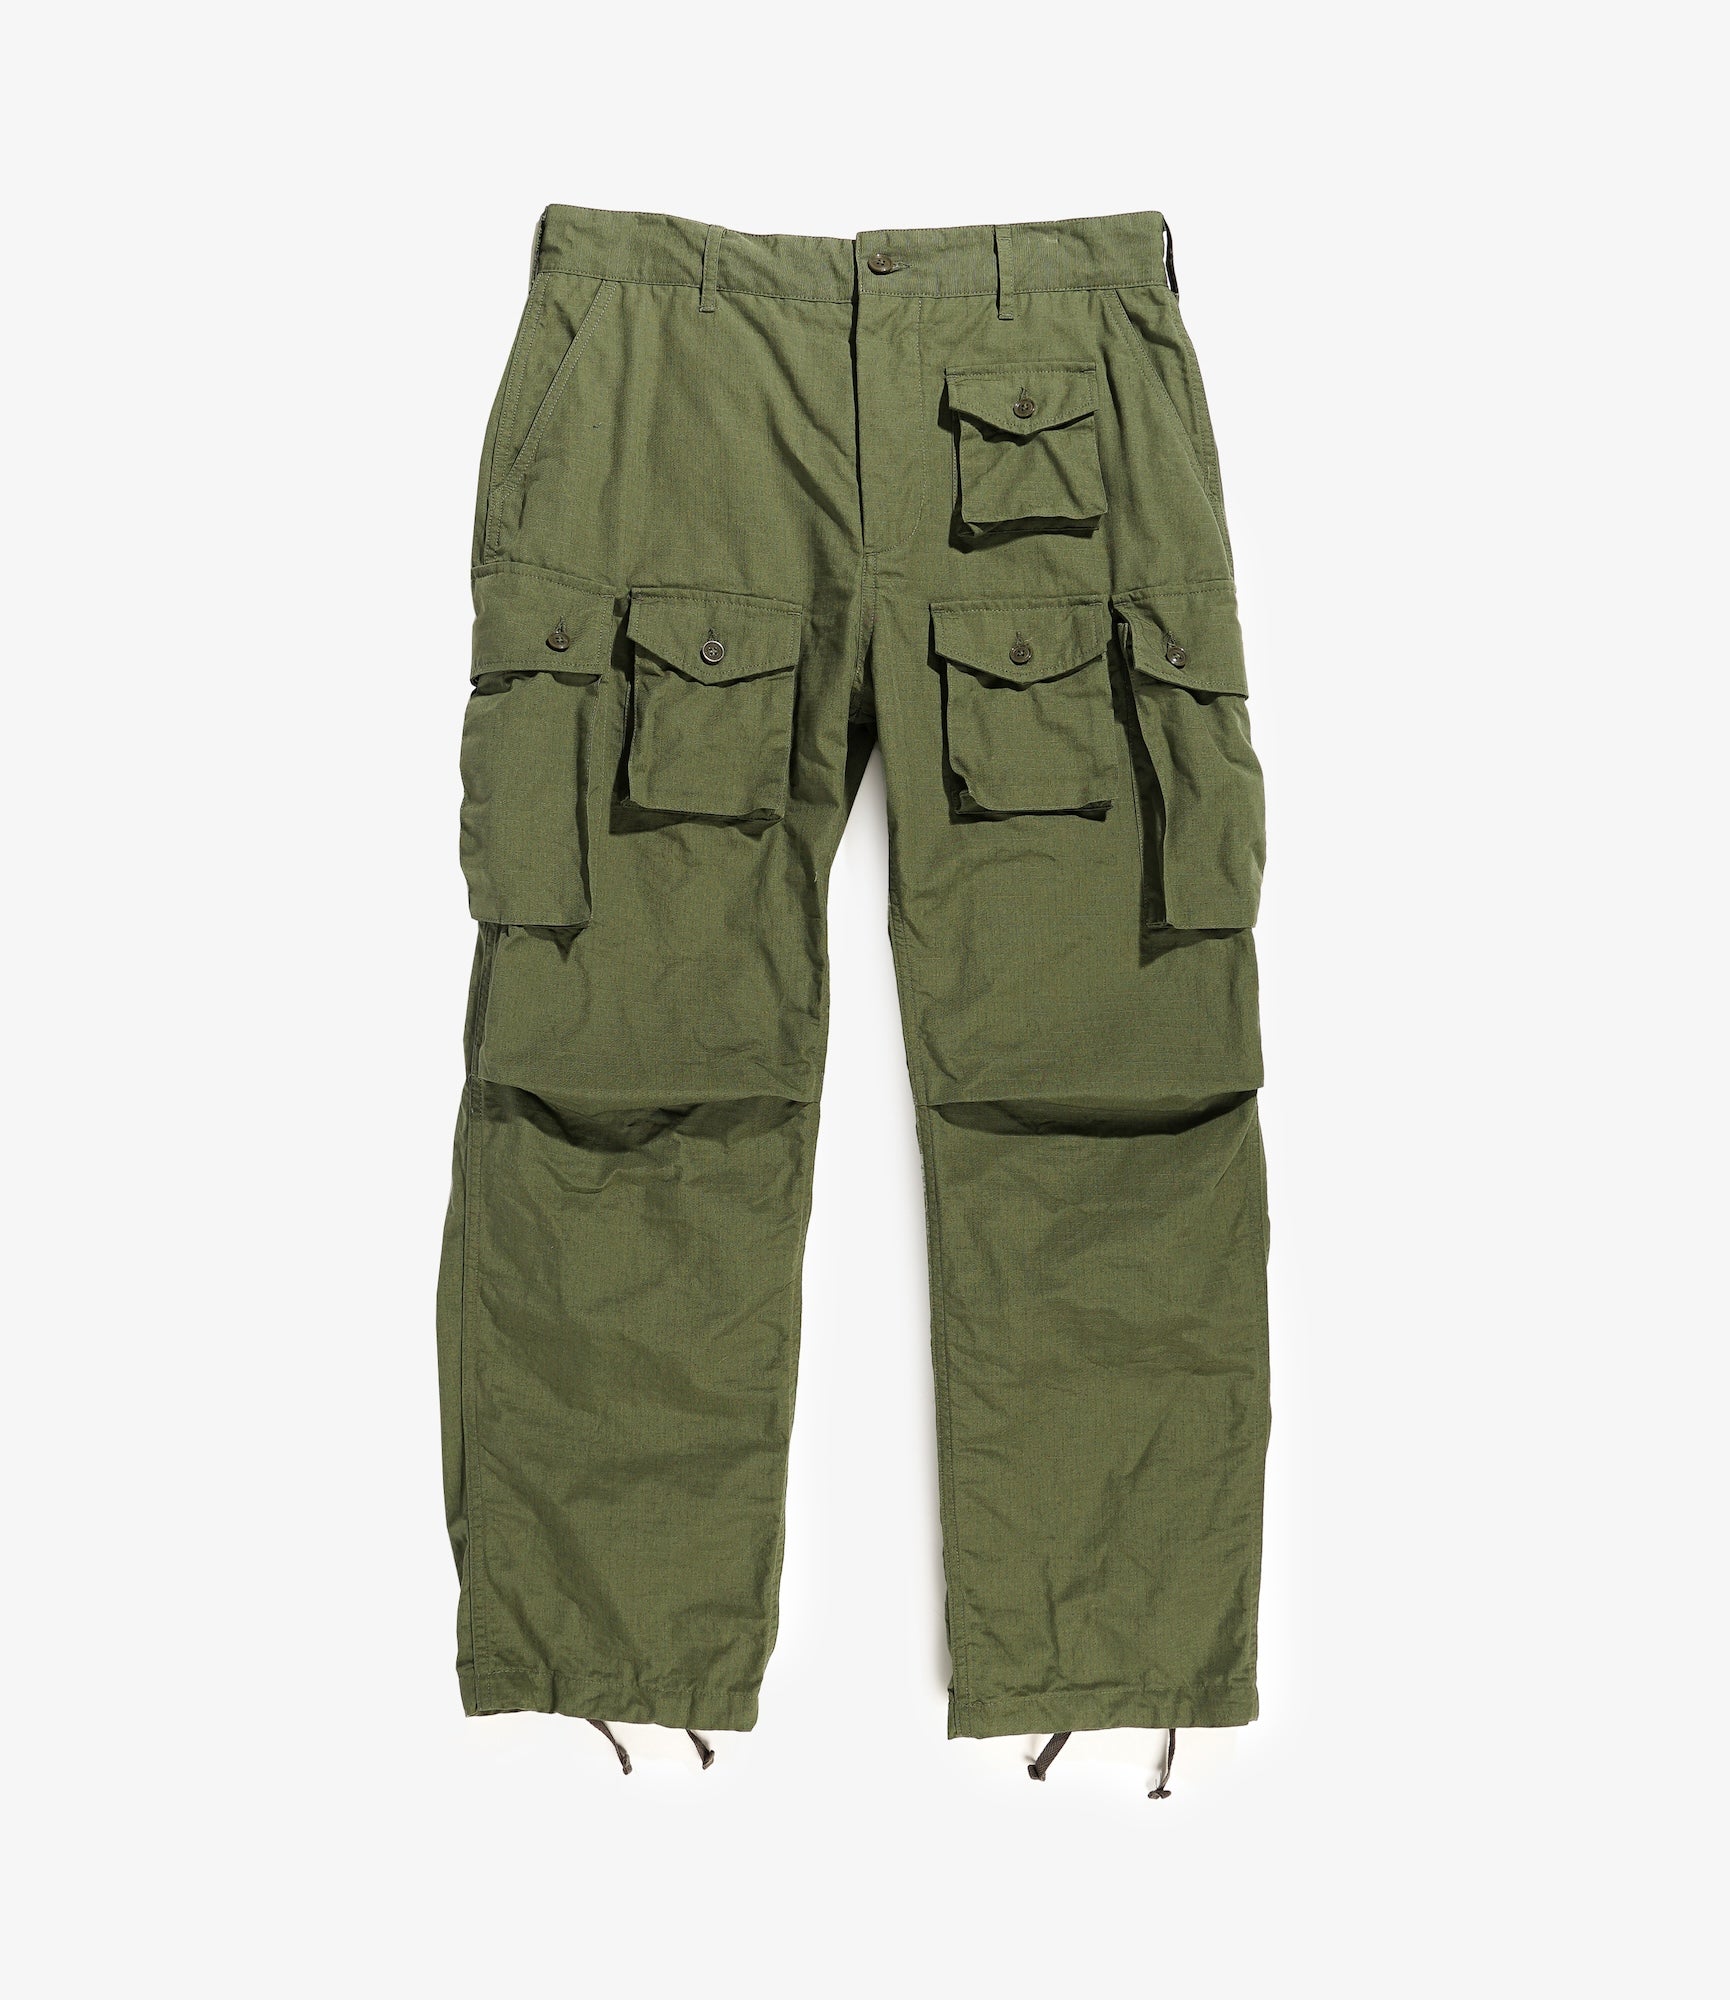 Engineered Garments FA Pant - Olive Cotton Ripstop